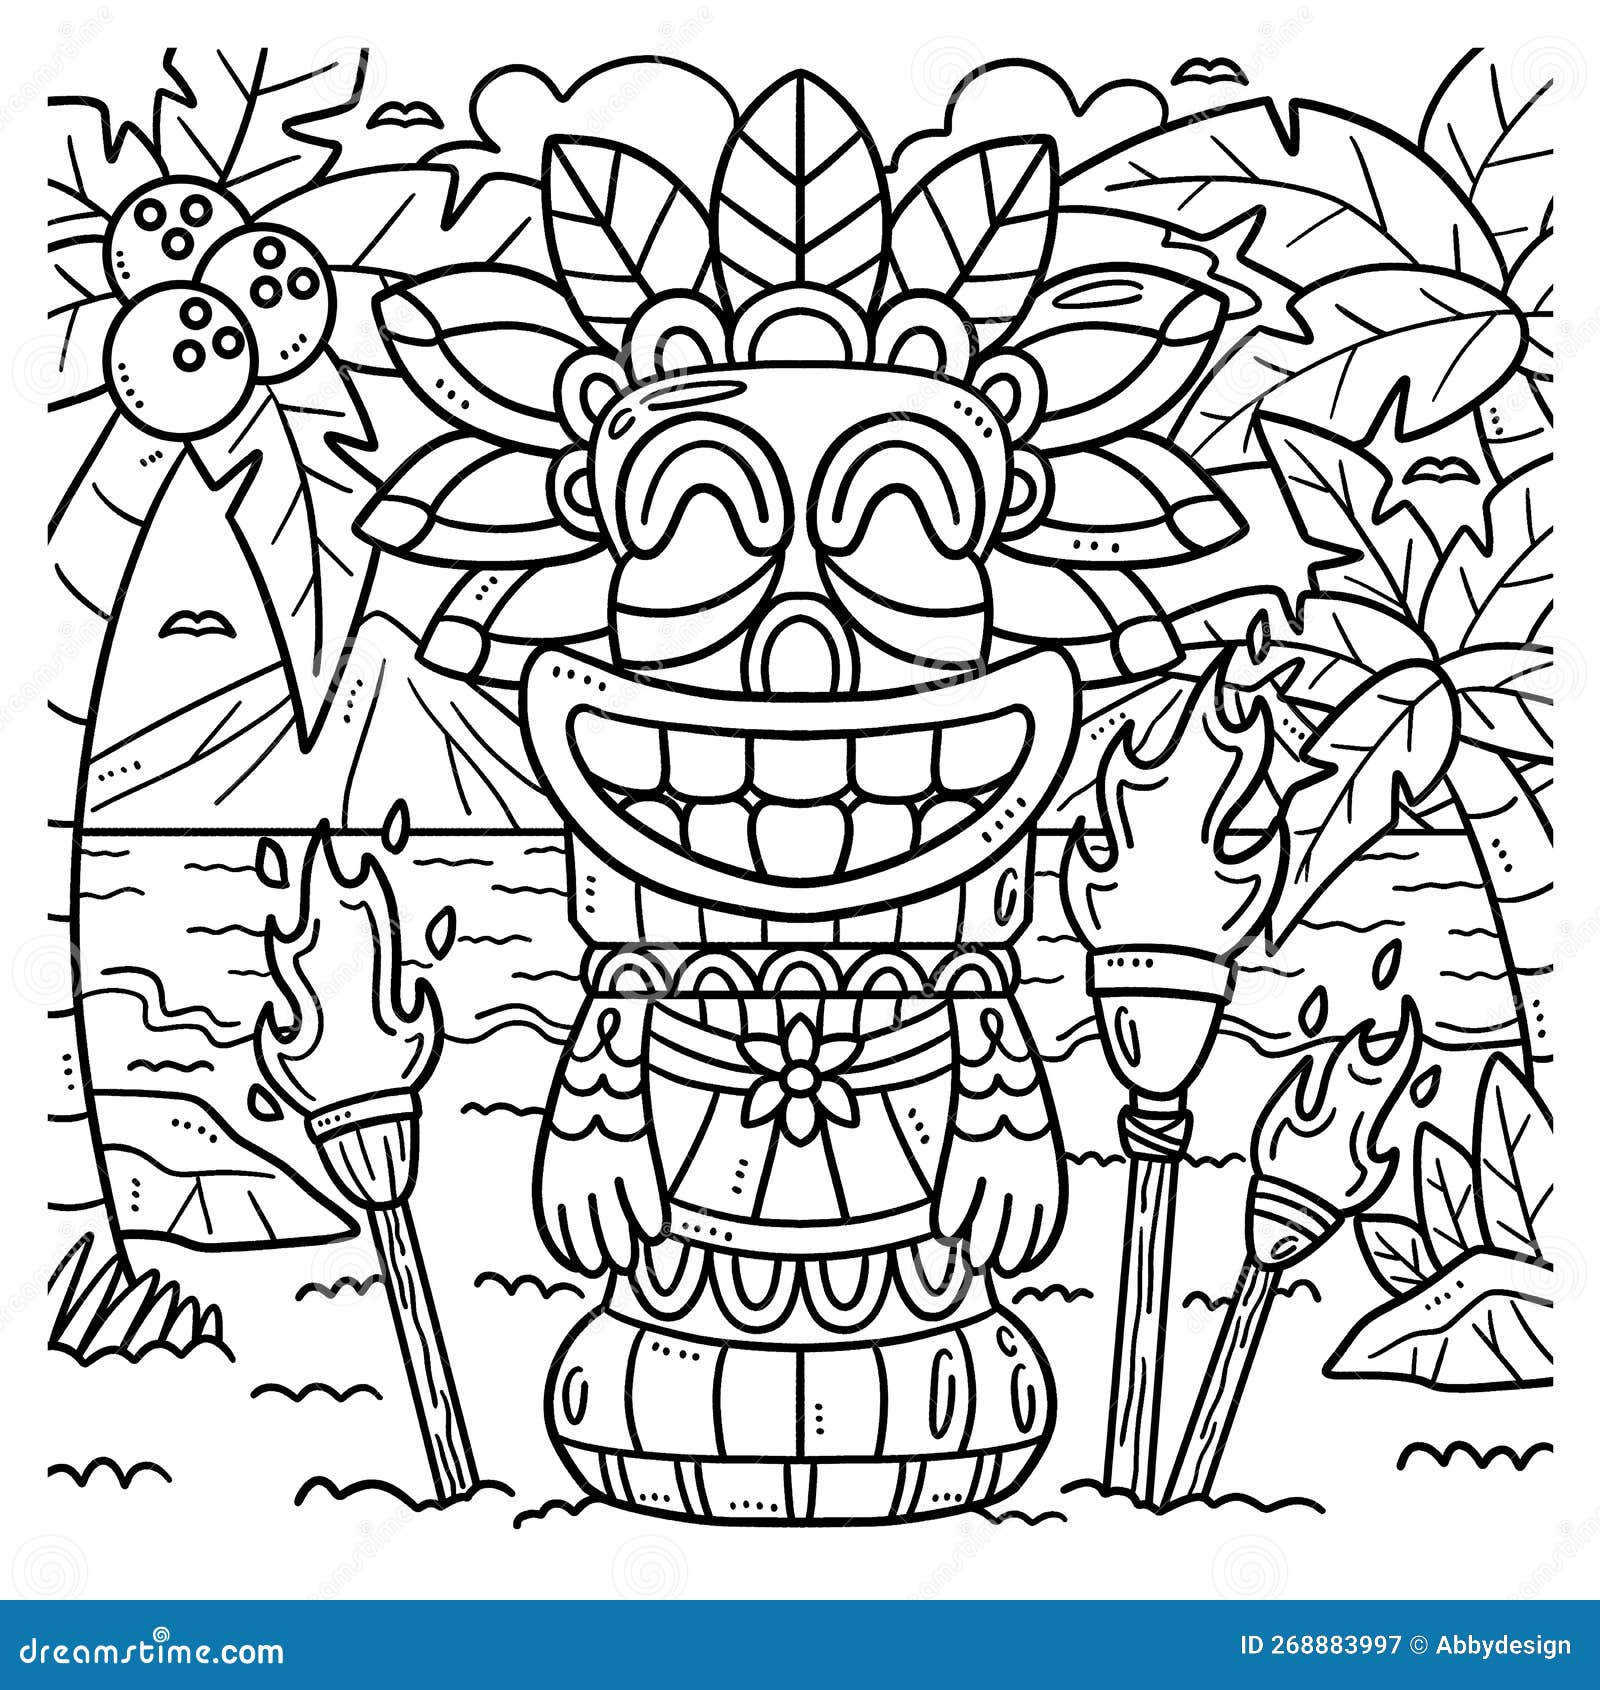 Summer tiki totem pole coloring page for kids stock vector